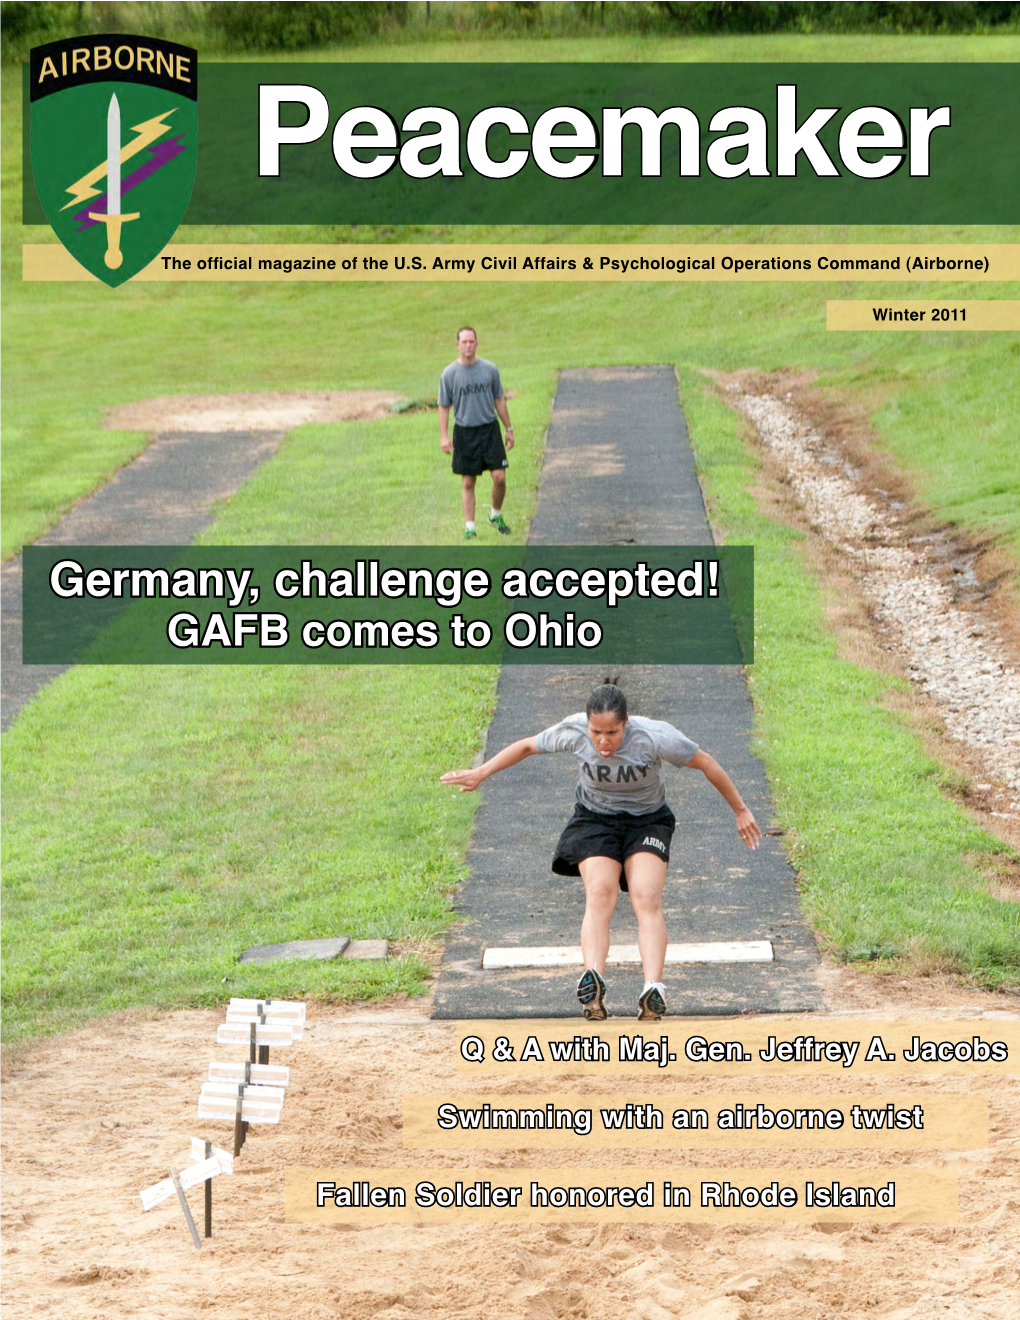 Germany, Challenge Accepted! GAFB Comes to Ohio